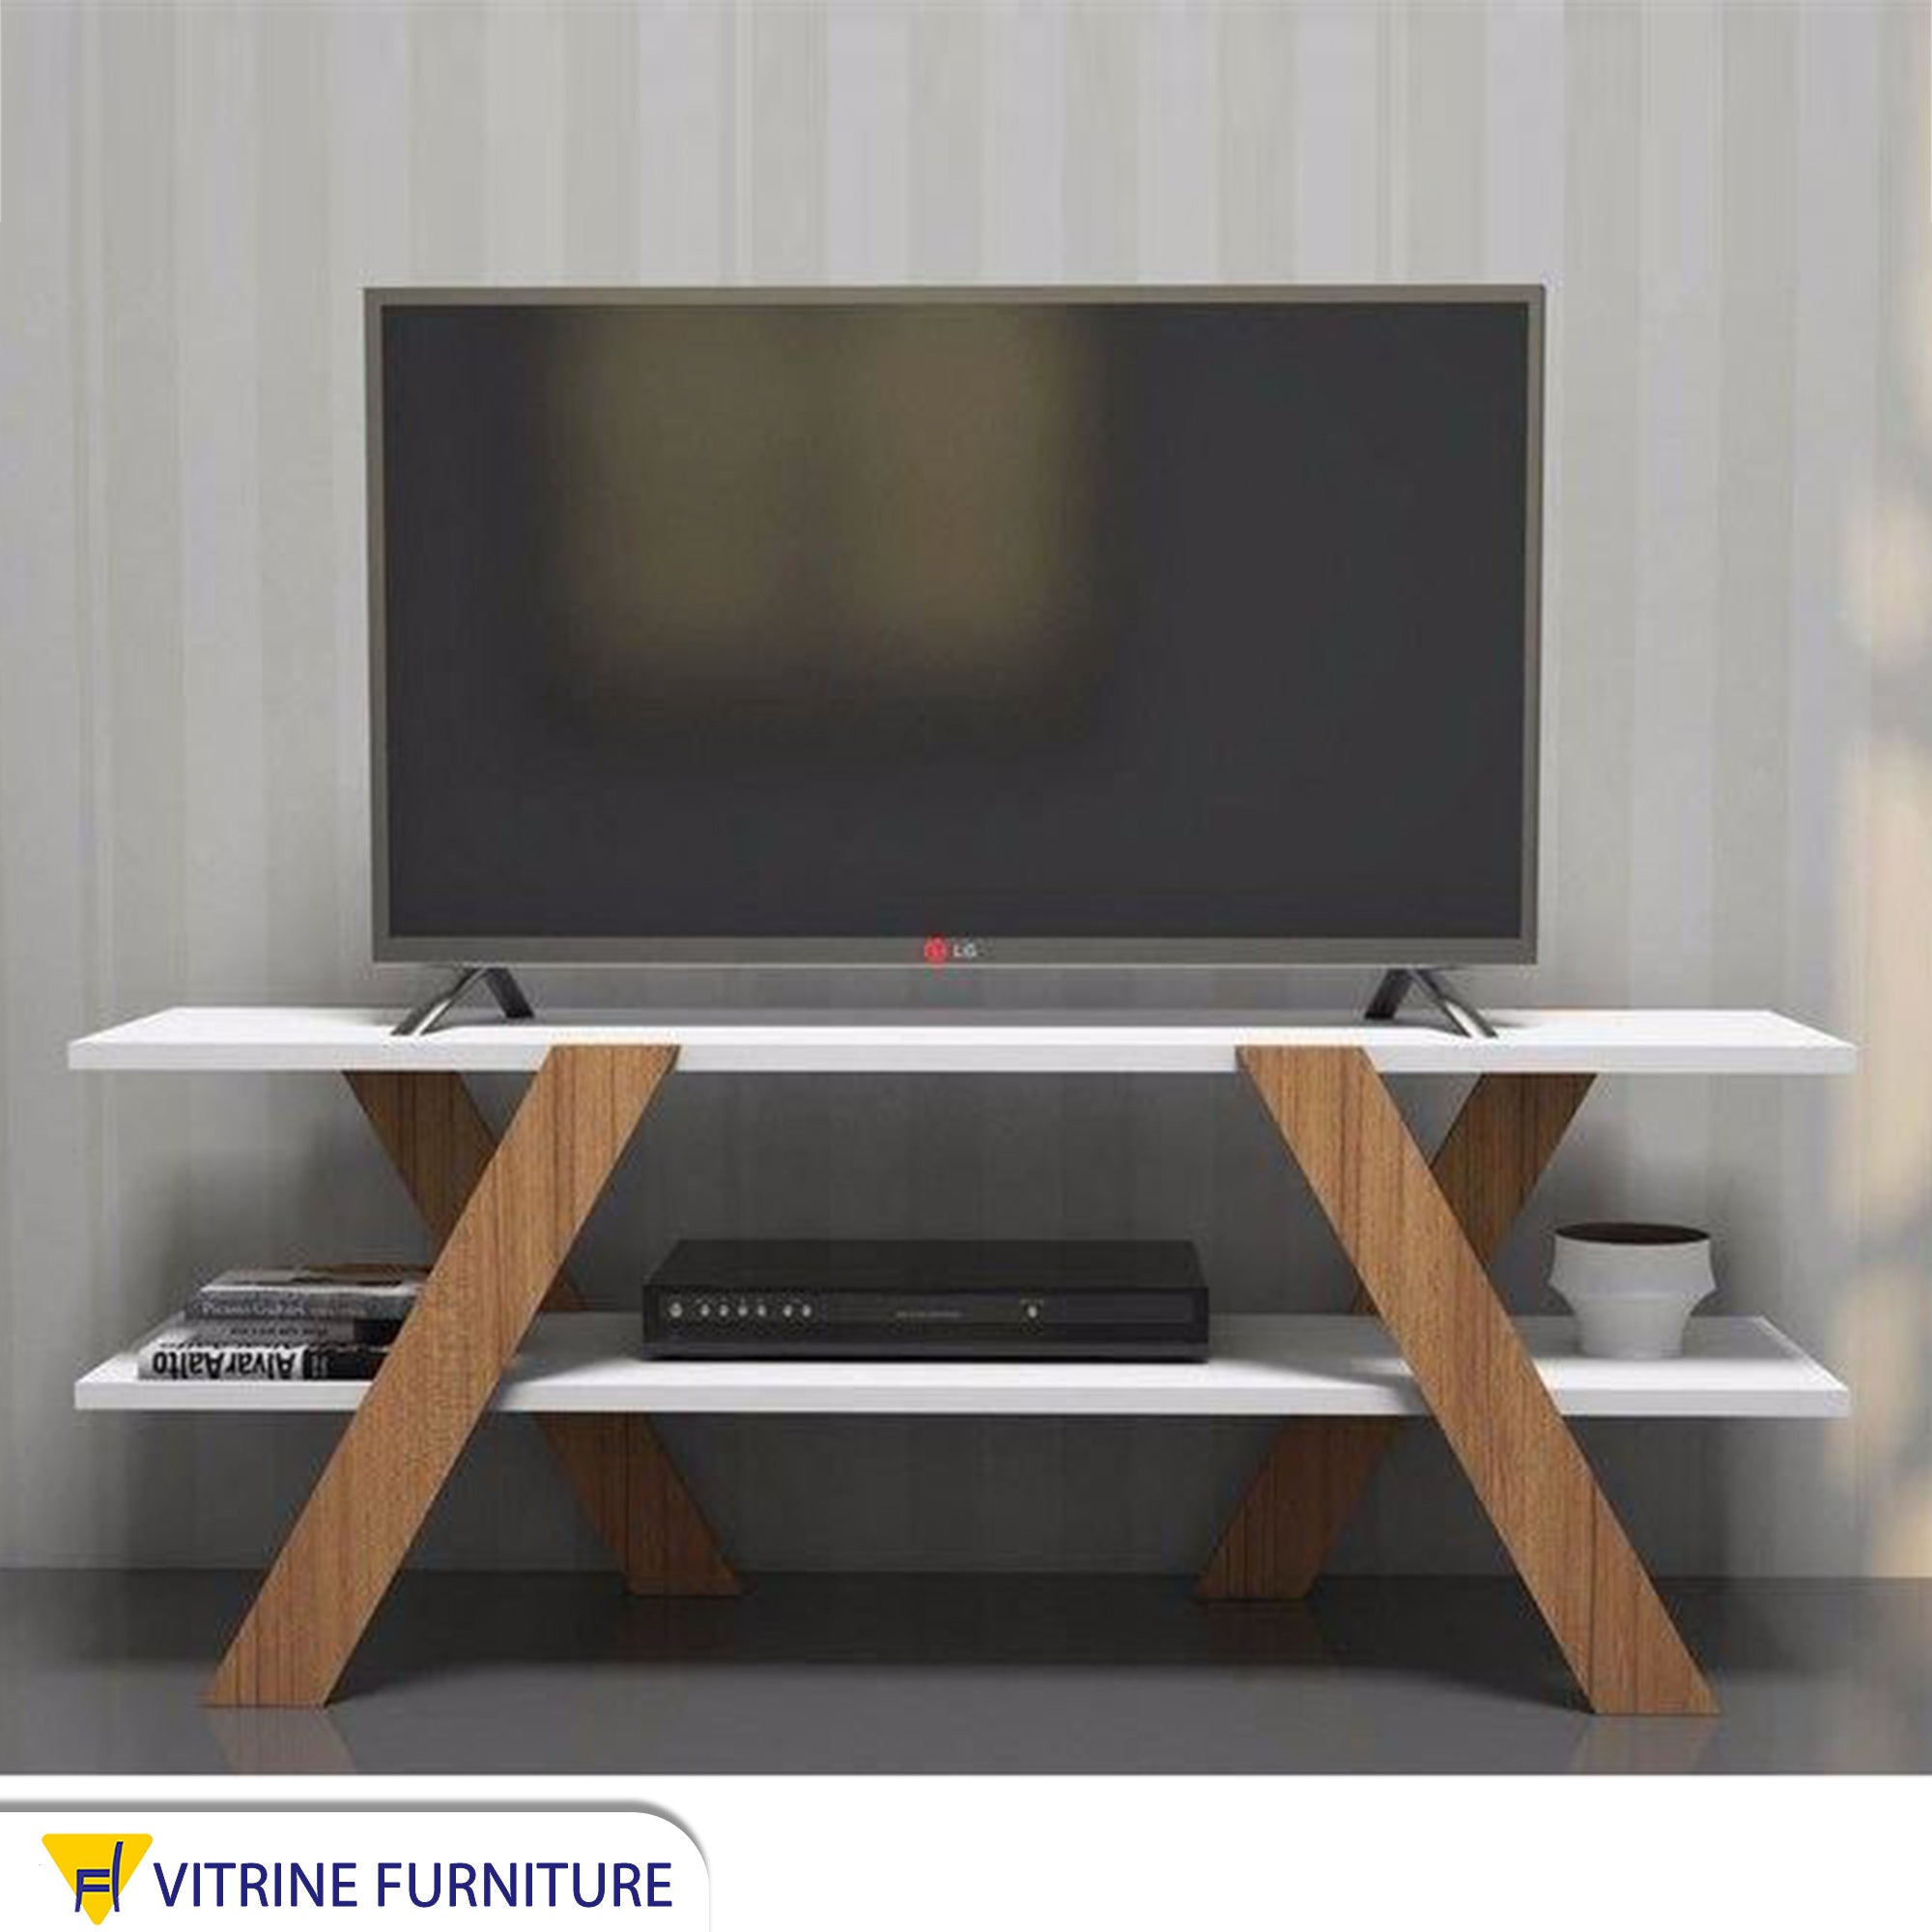 TV table with two shelves and X-letter legs, white and beige